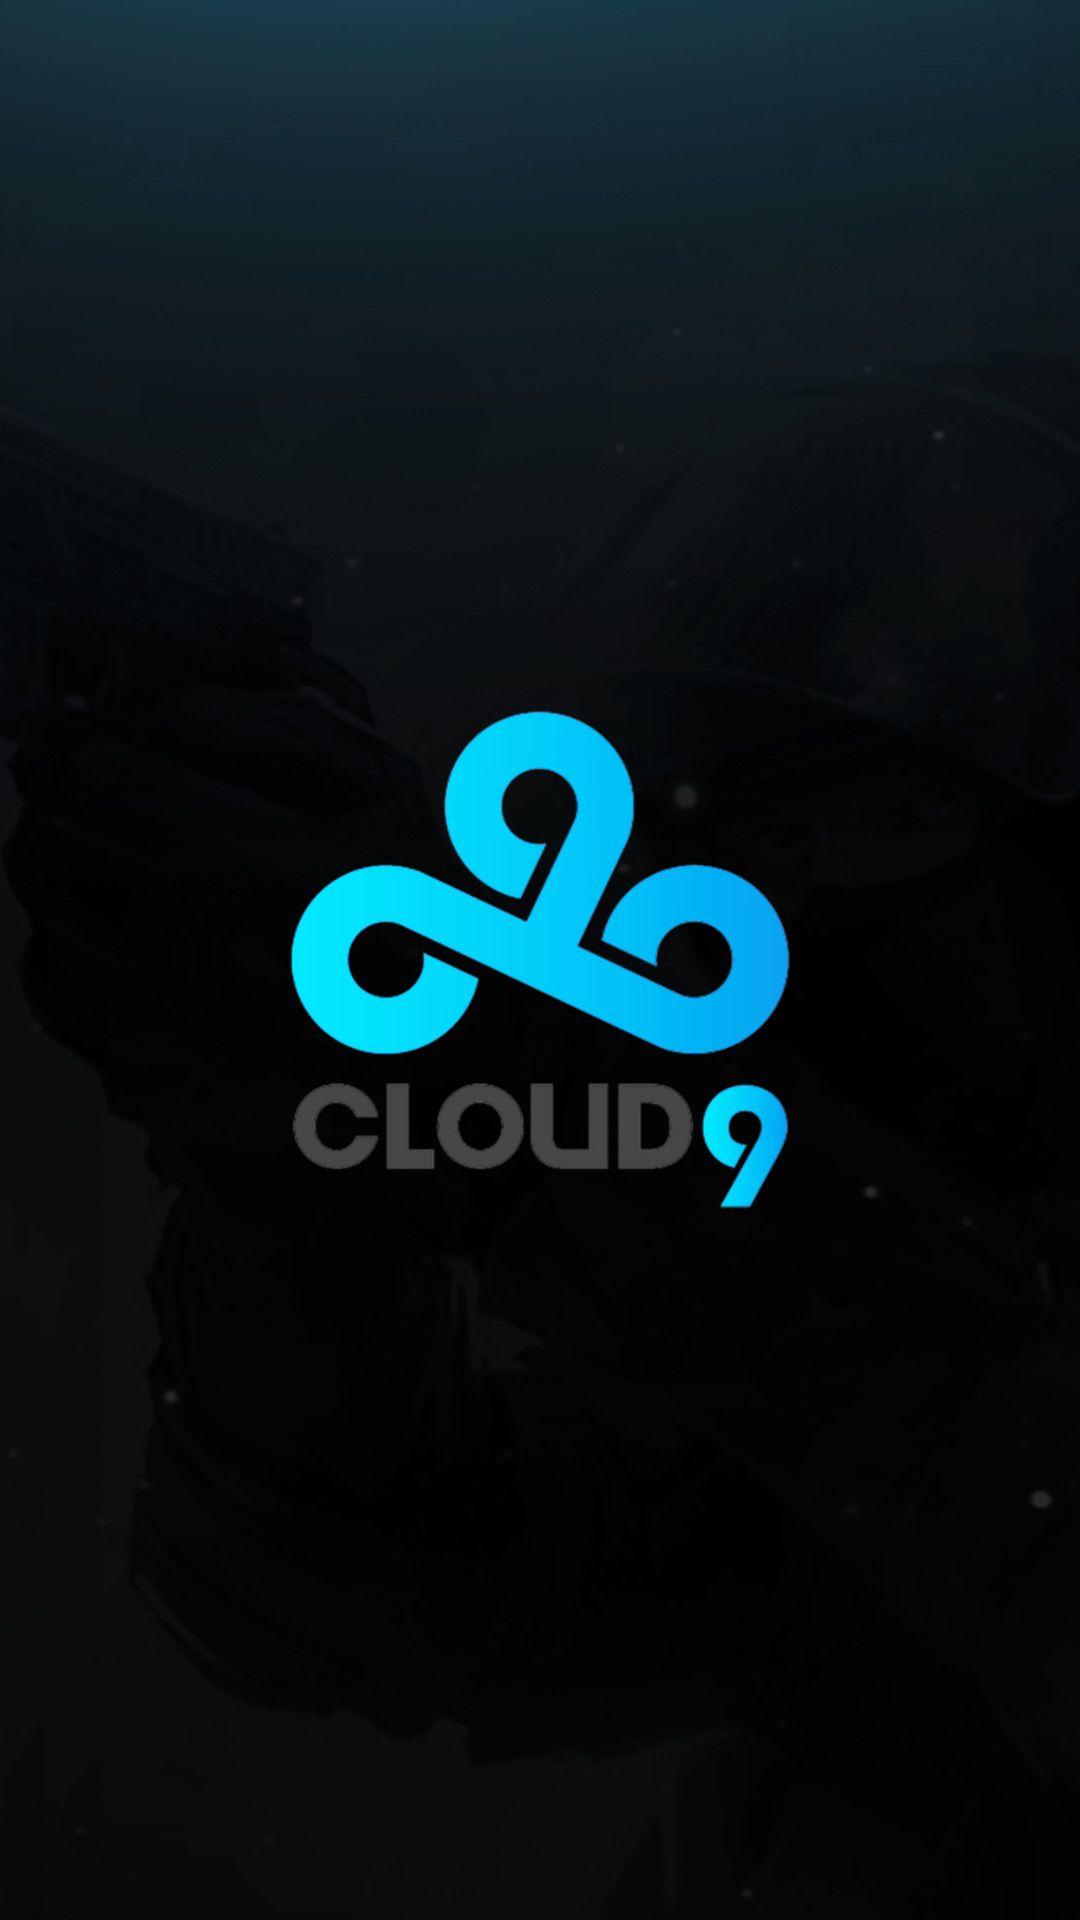 Cloud9 Wallpapers Top Free Cloud9 Backgrounds Wallpaperaccess